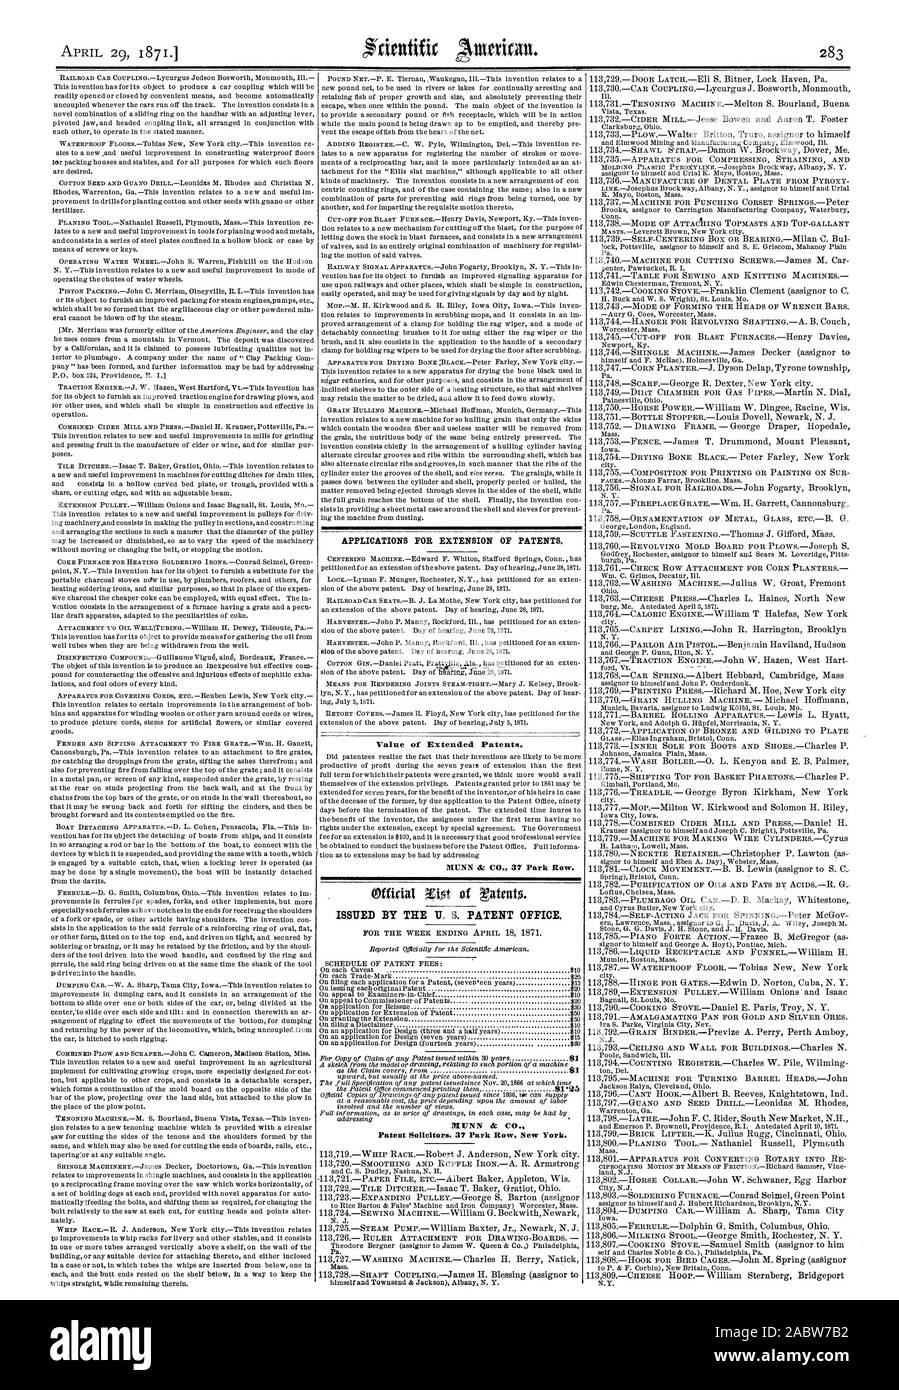 APPLICATIONS FOE EXTENSION OF PATENTS. Value of Extended Patents. MUNN & CO. 37 Park Row. ISSUED BY THE U. S. PATENT OFFICE. MUNN & CO. Patent Solicitors. 37 Park Row New York., scientific american, 1871-04-29 Stock Photo